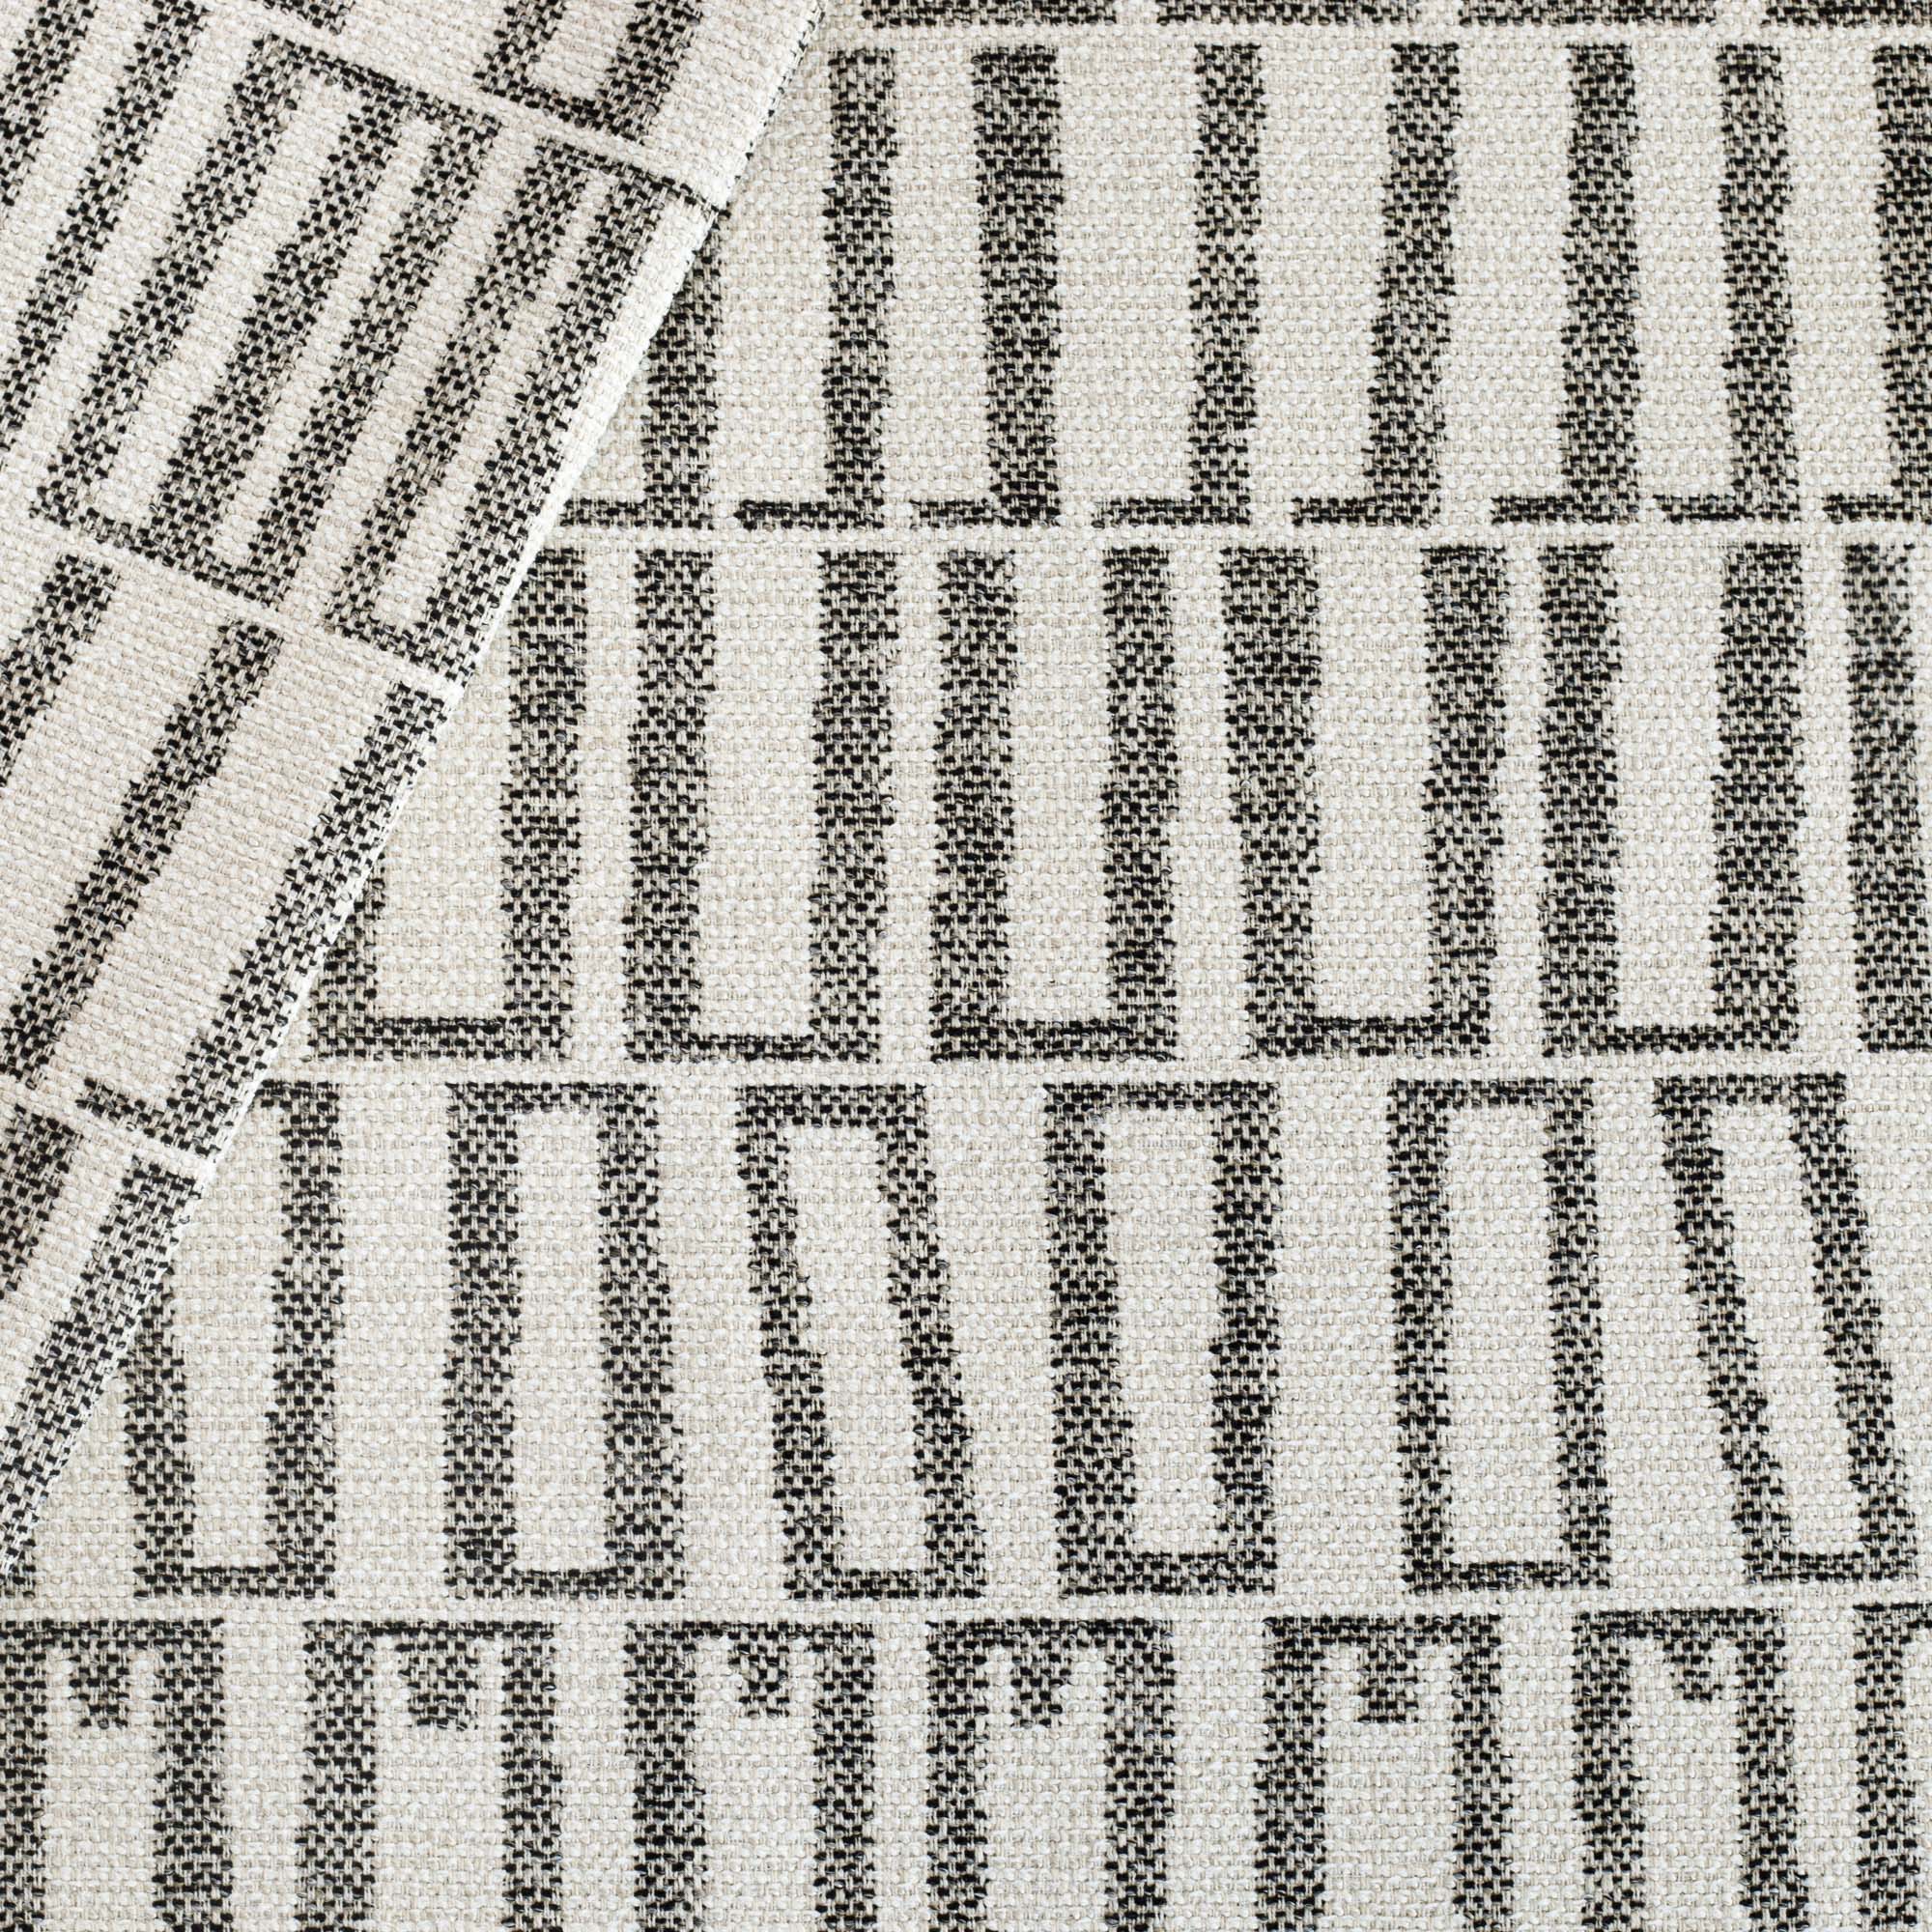 Mallia InsideOut fabric Carbon, a black and sand beige abstract geometric patterned outdoor fabric from Tonic Living